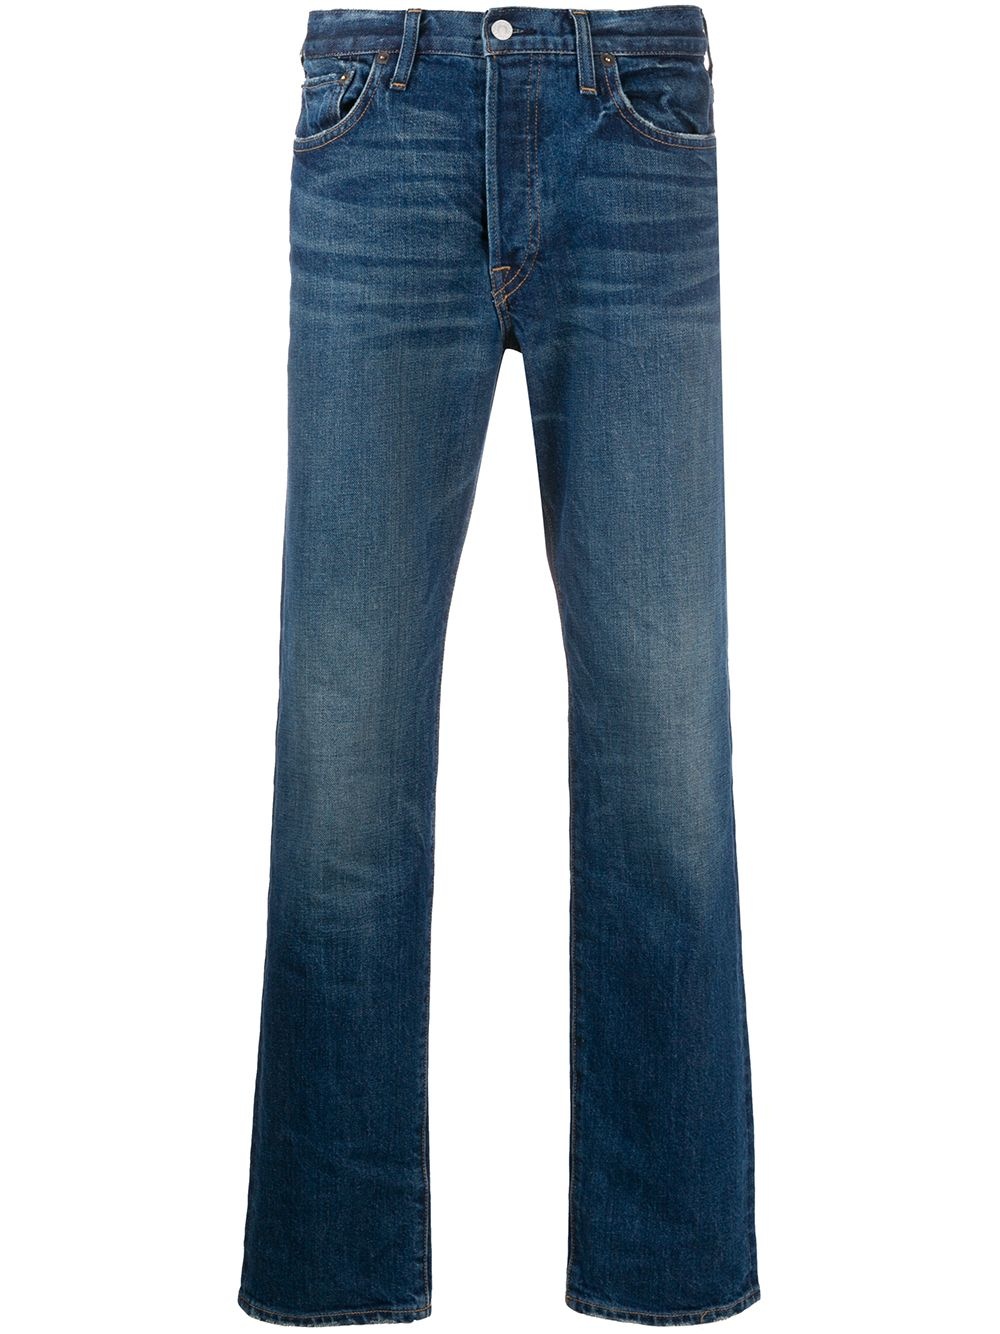 faded slim jeans - 1